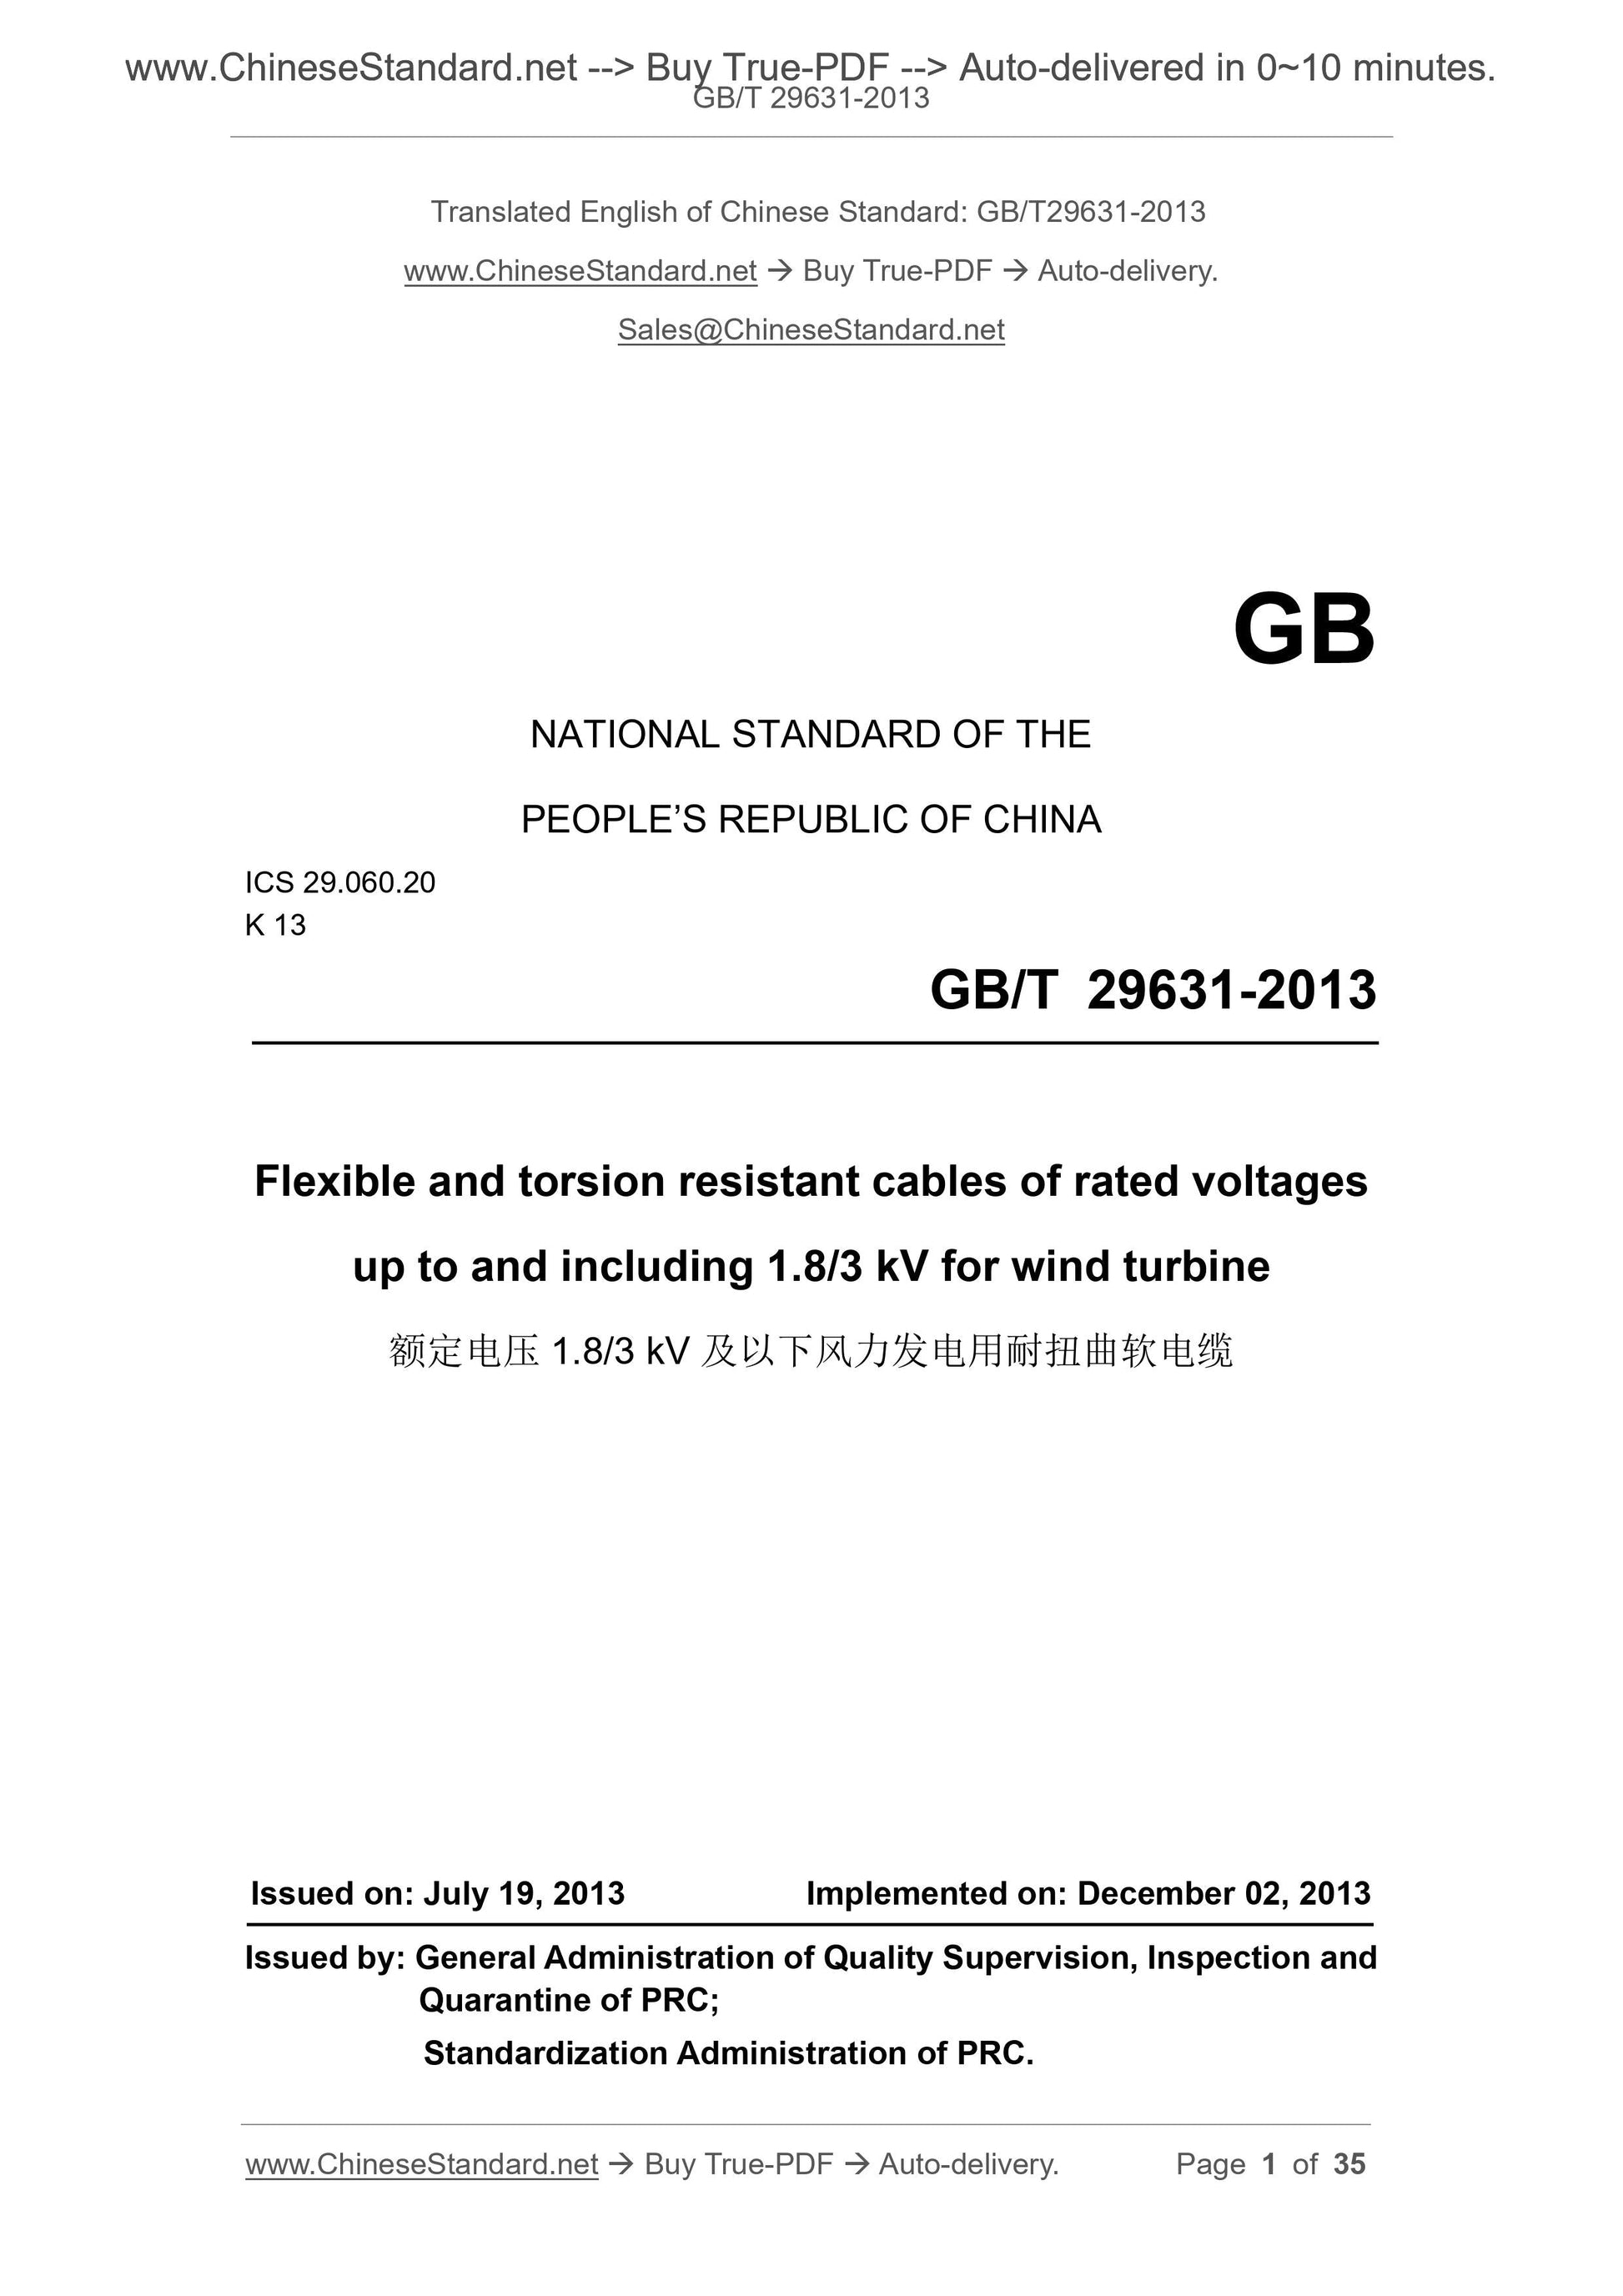 GB/T 29631-2013 Page 1